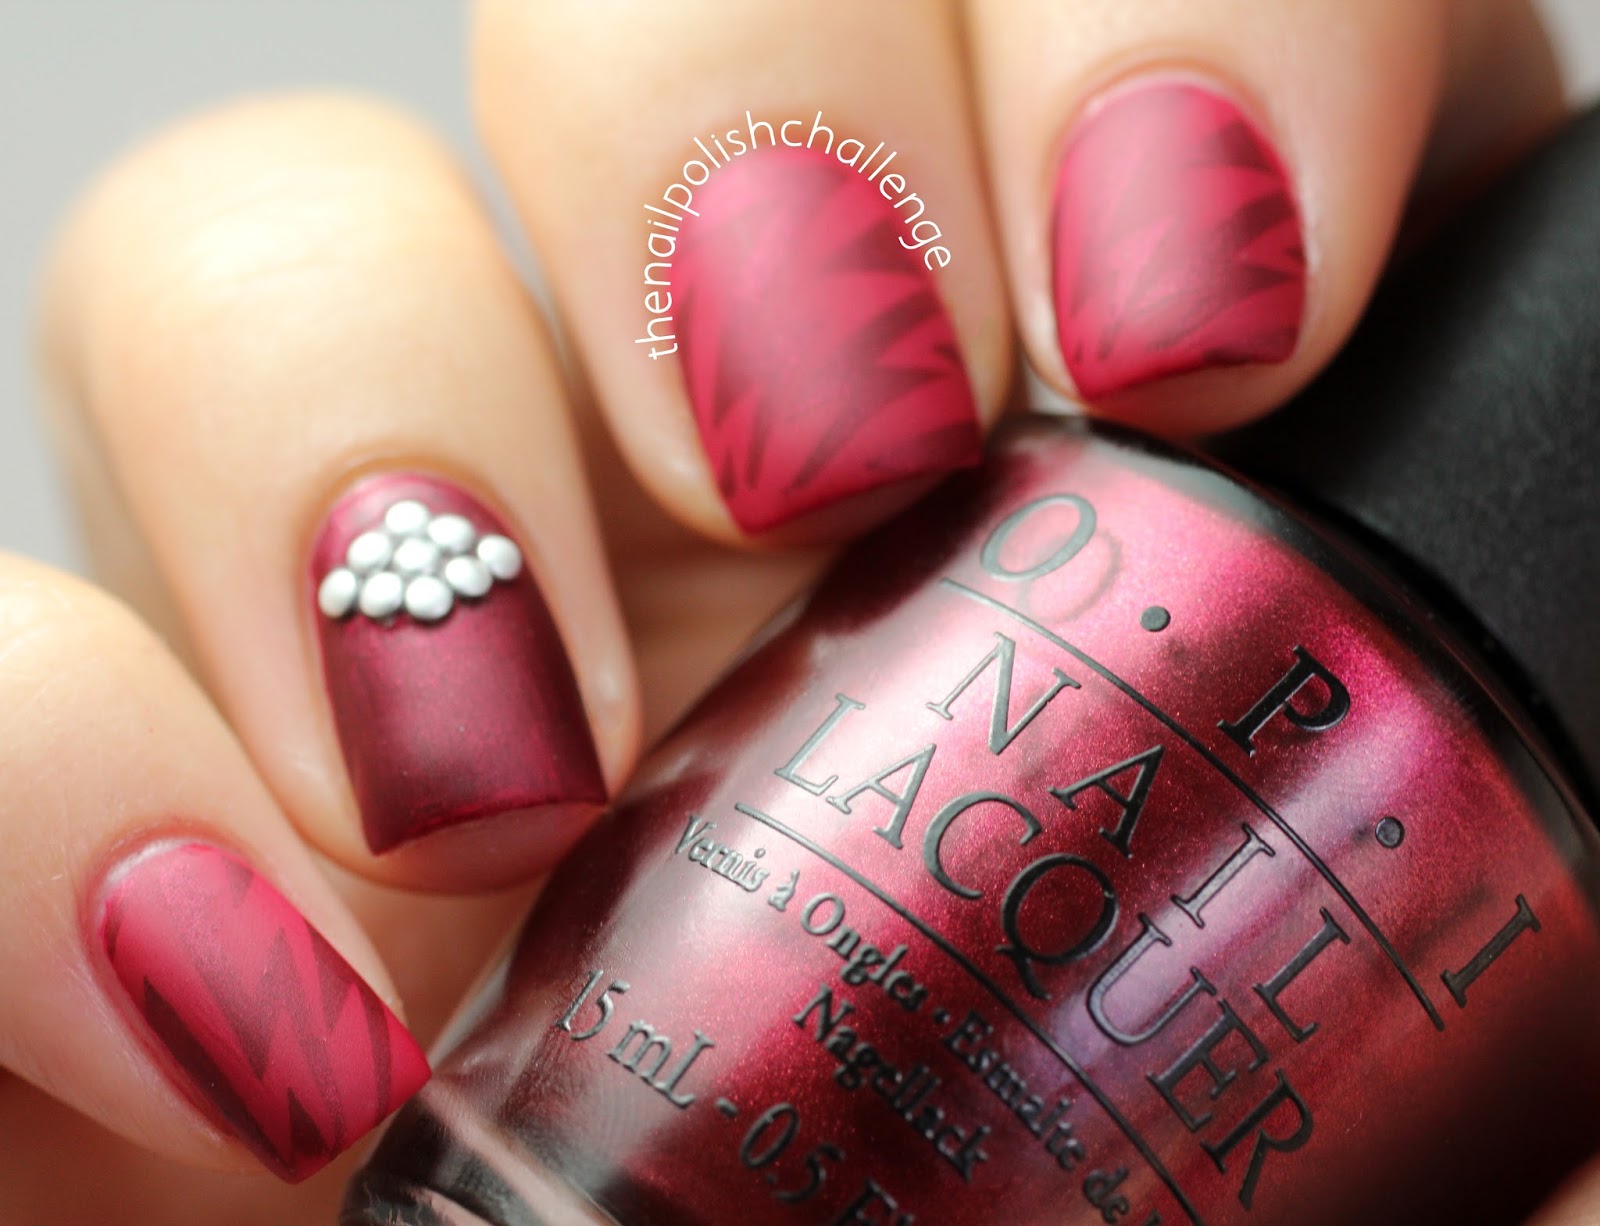 The Nail Polish Challenge: Stamping and Studs with OPI Bogota Blackberry